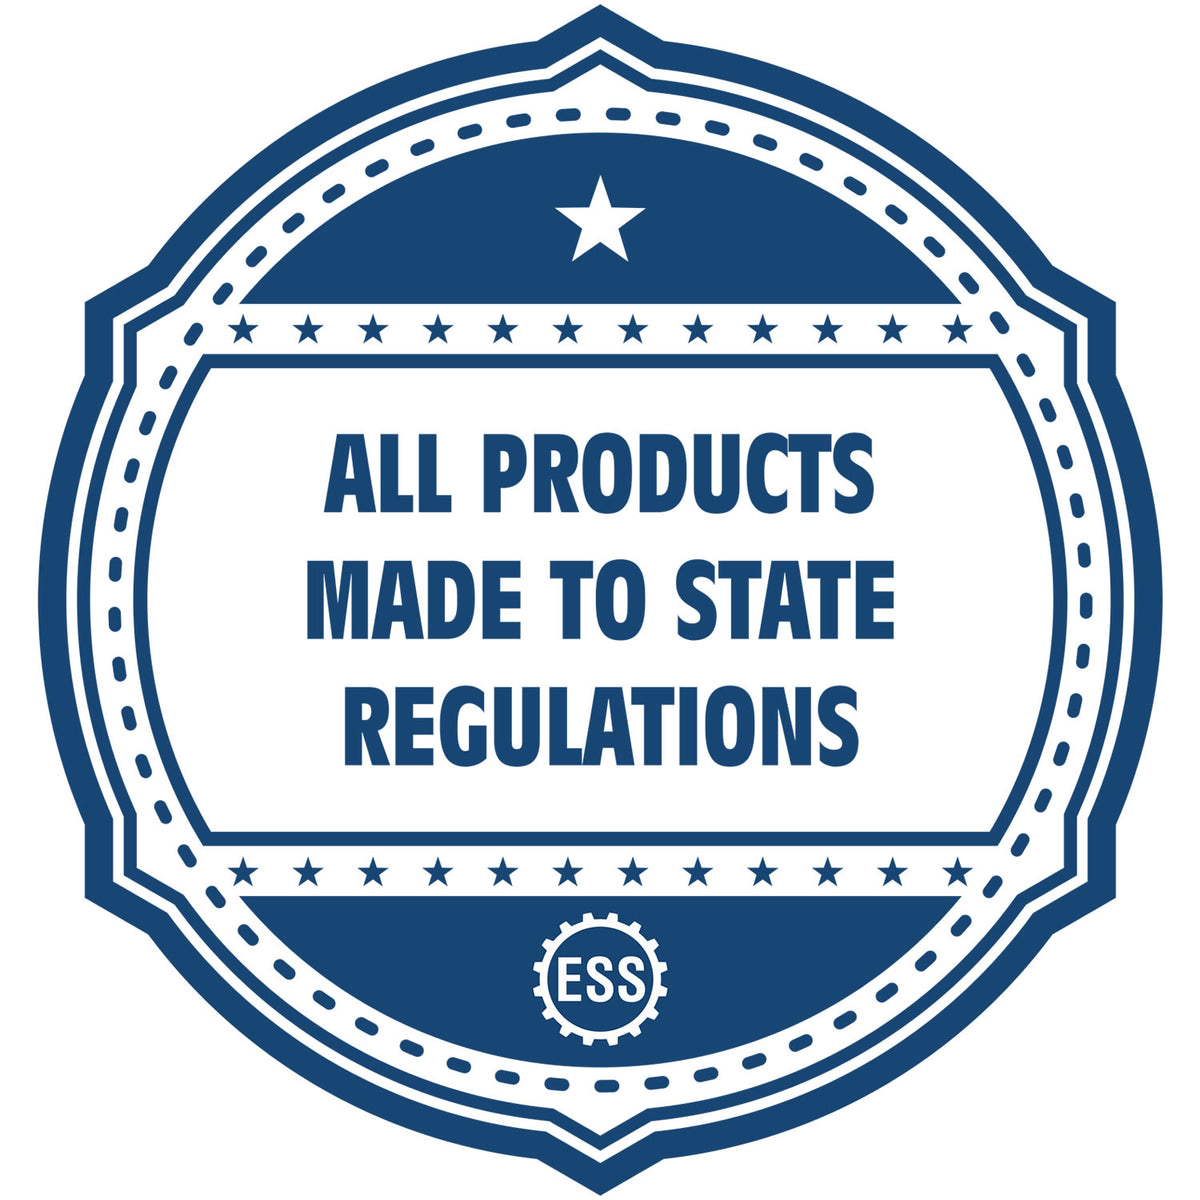 A blue icon or badge for the New Hampshire Professional Geologist Seal Stamp showing that this product is made in compliance with state regulations.